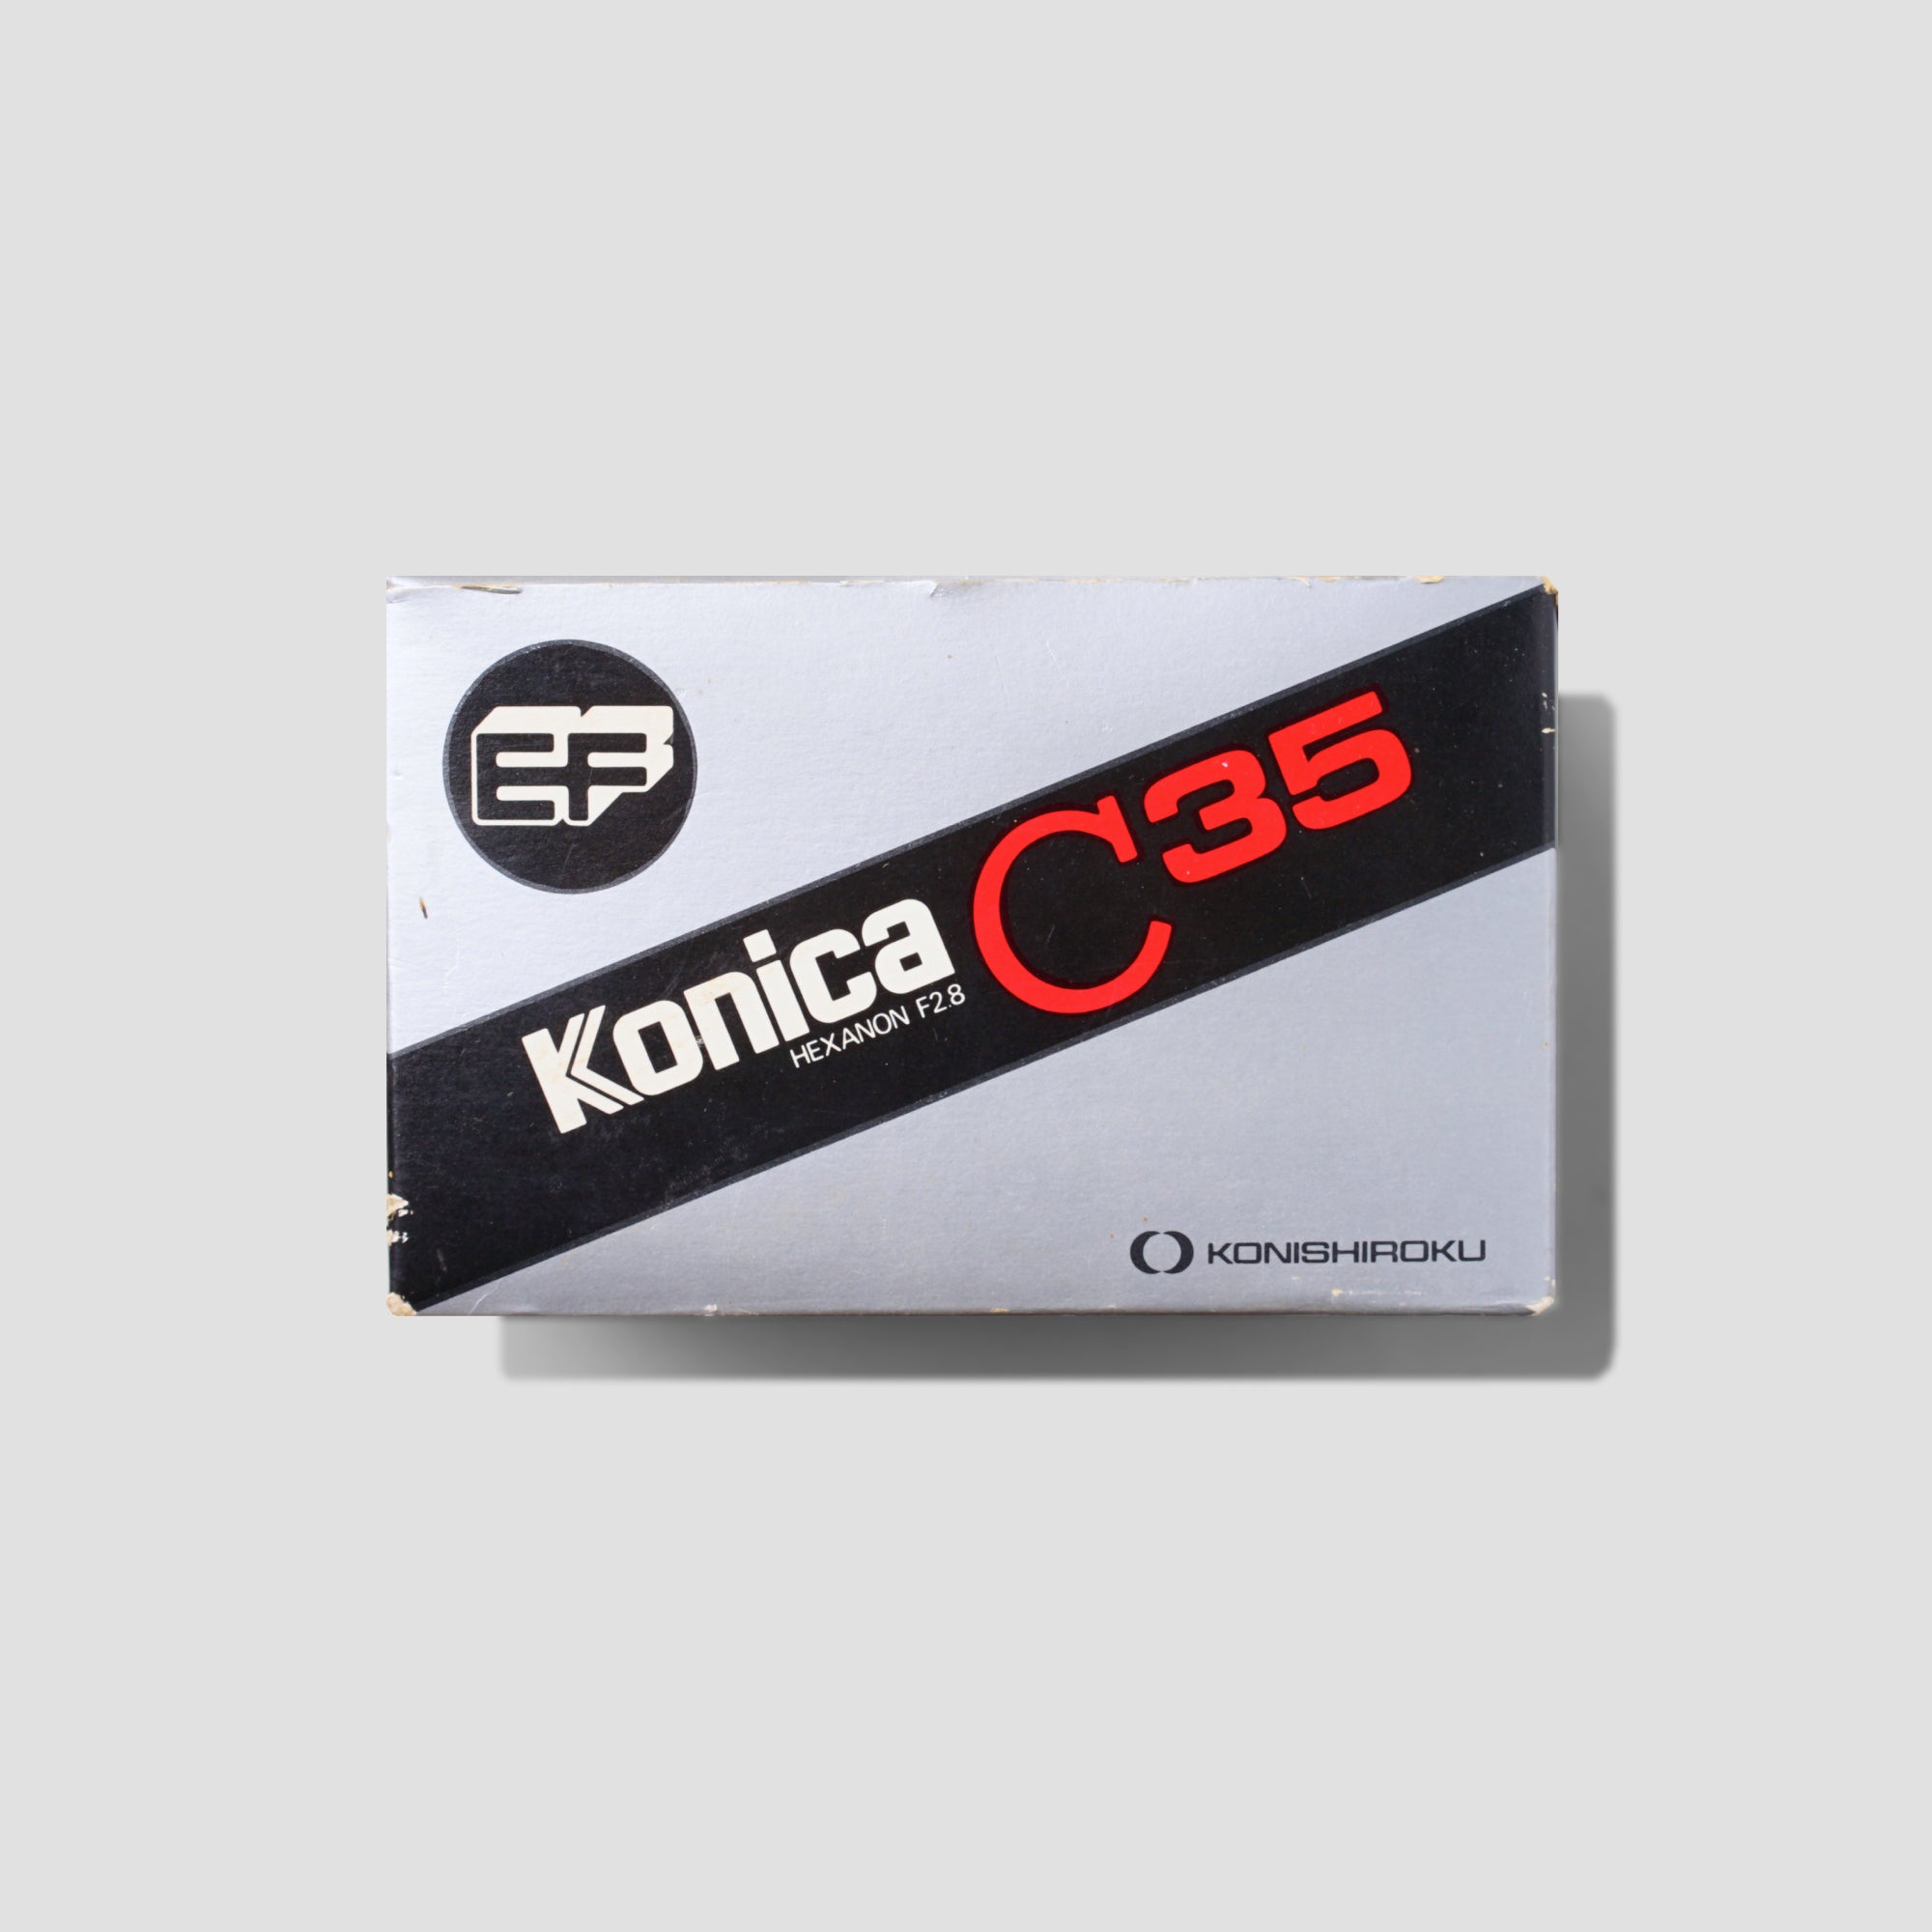 Buy Konica C35 EF now at Analogue Amsterdam